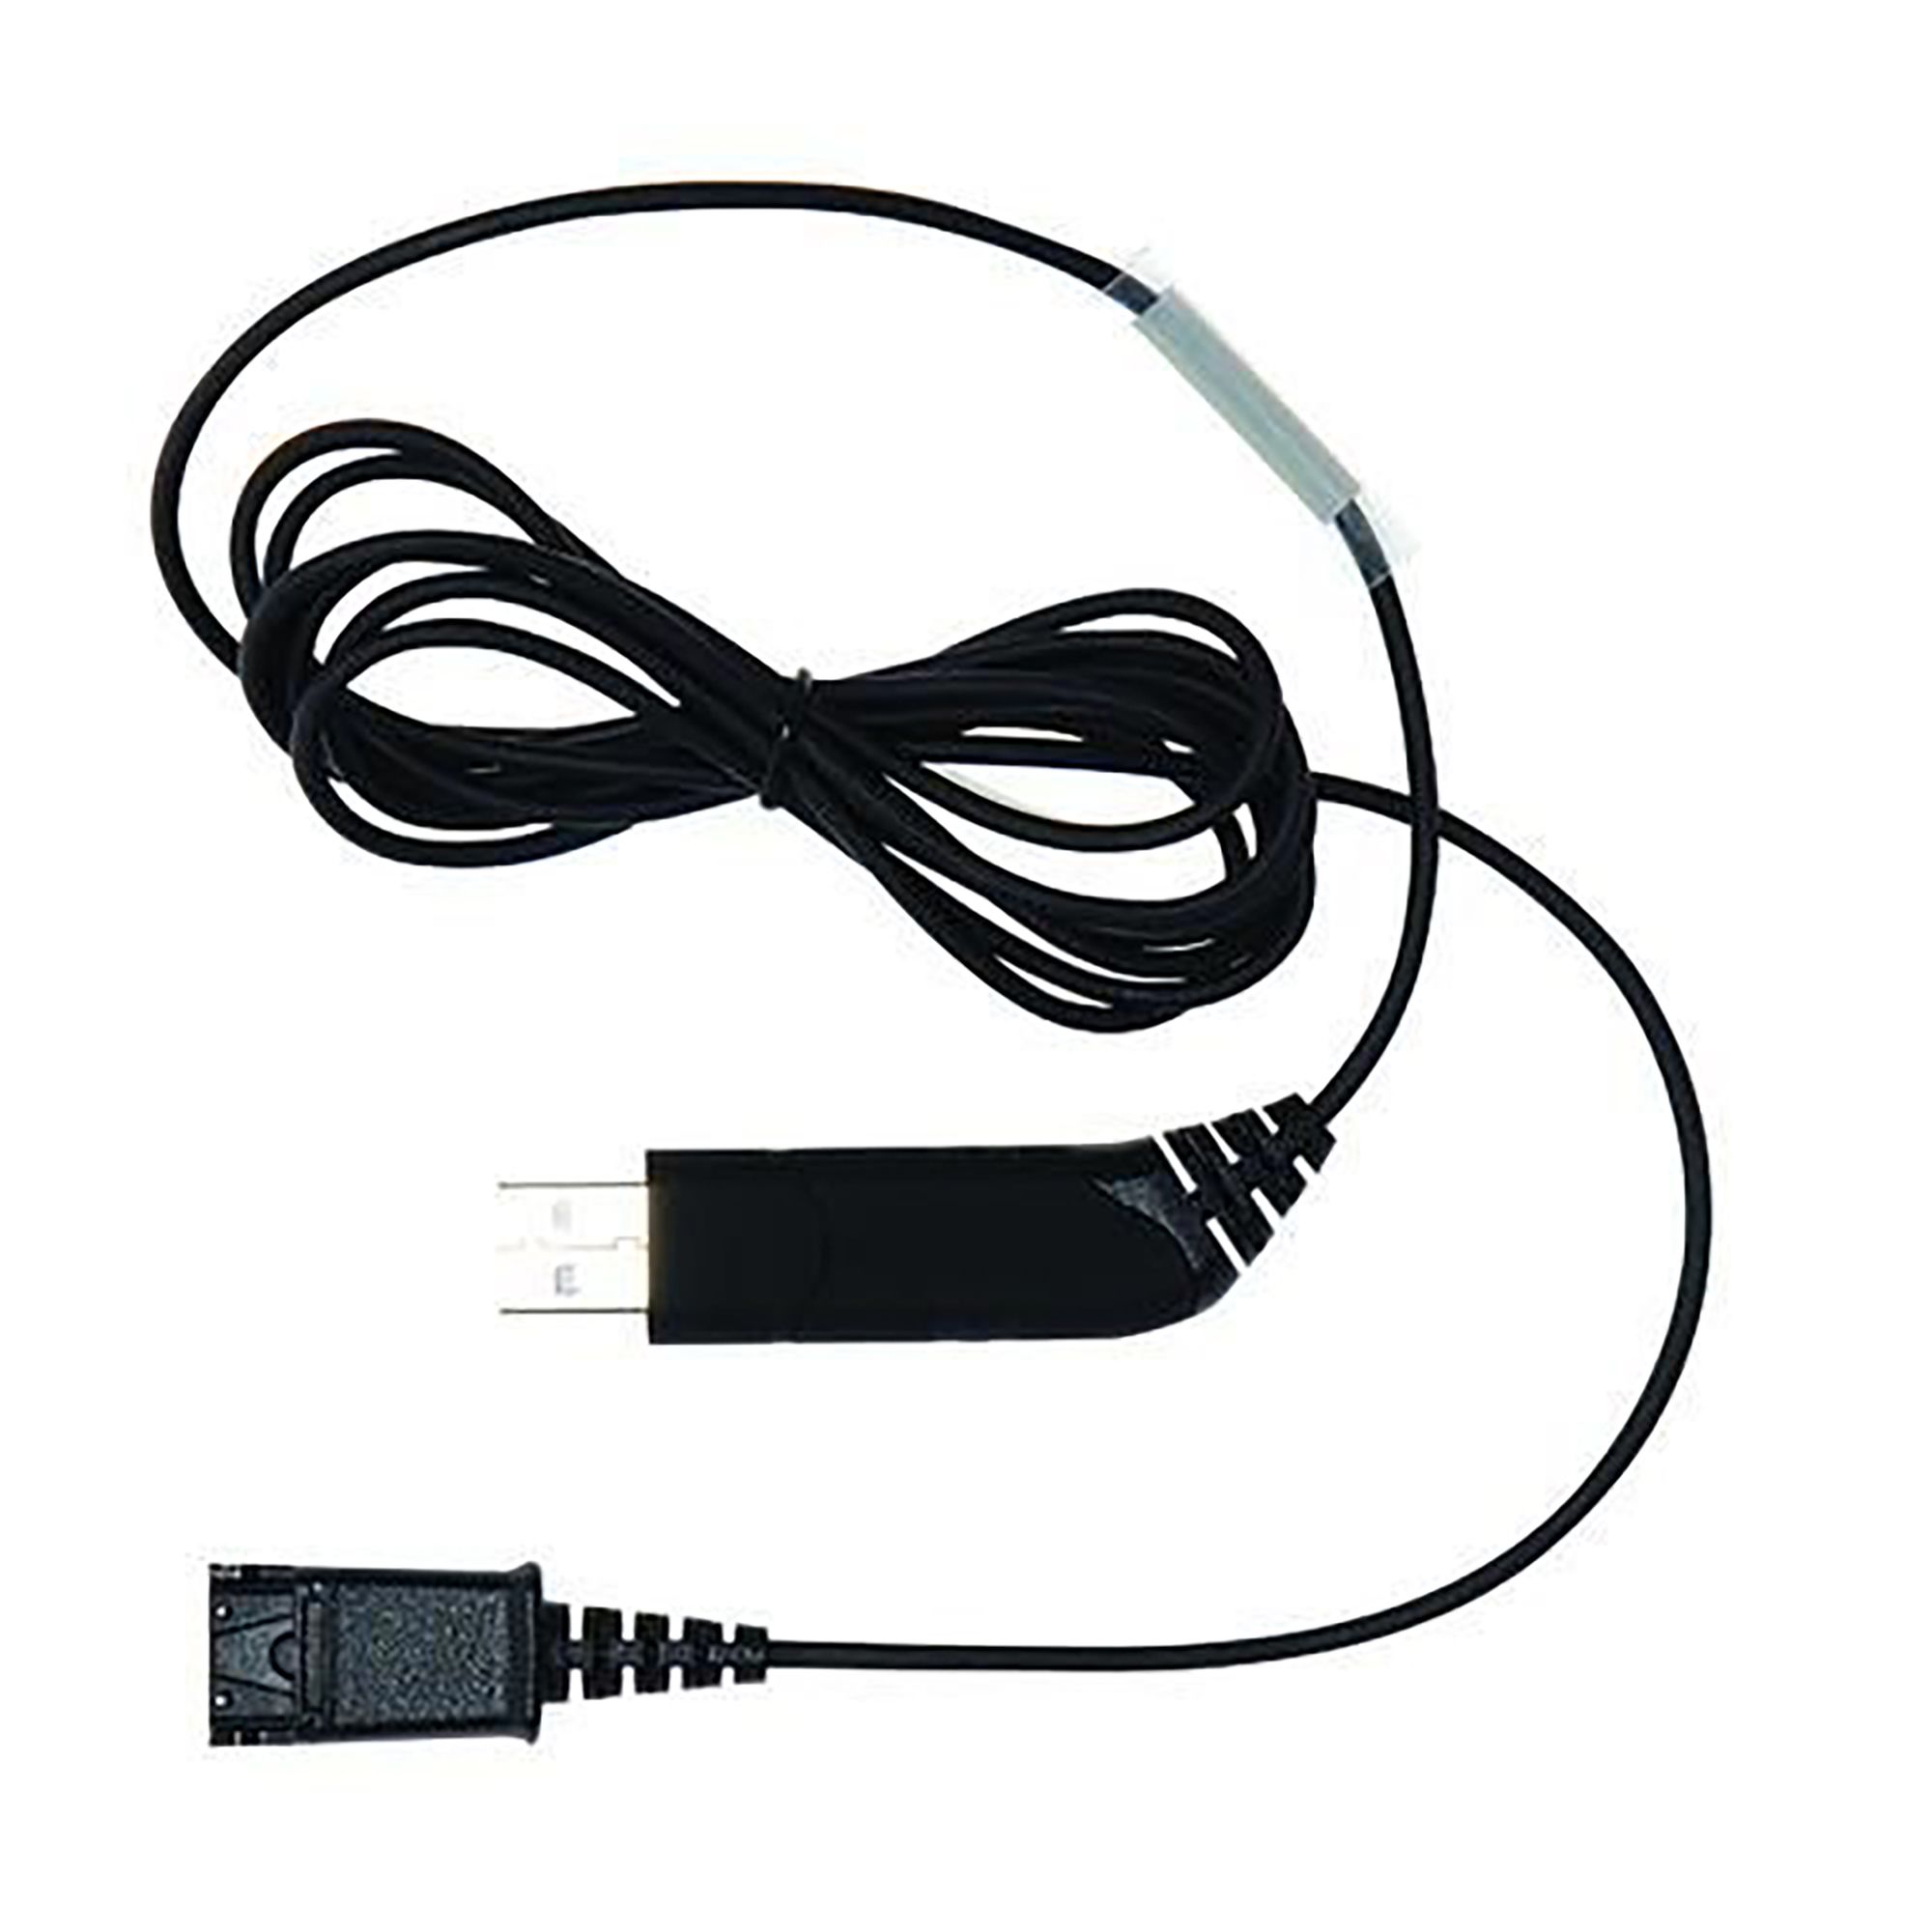 JPL BL-05NB GN USB Headset Cable